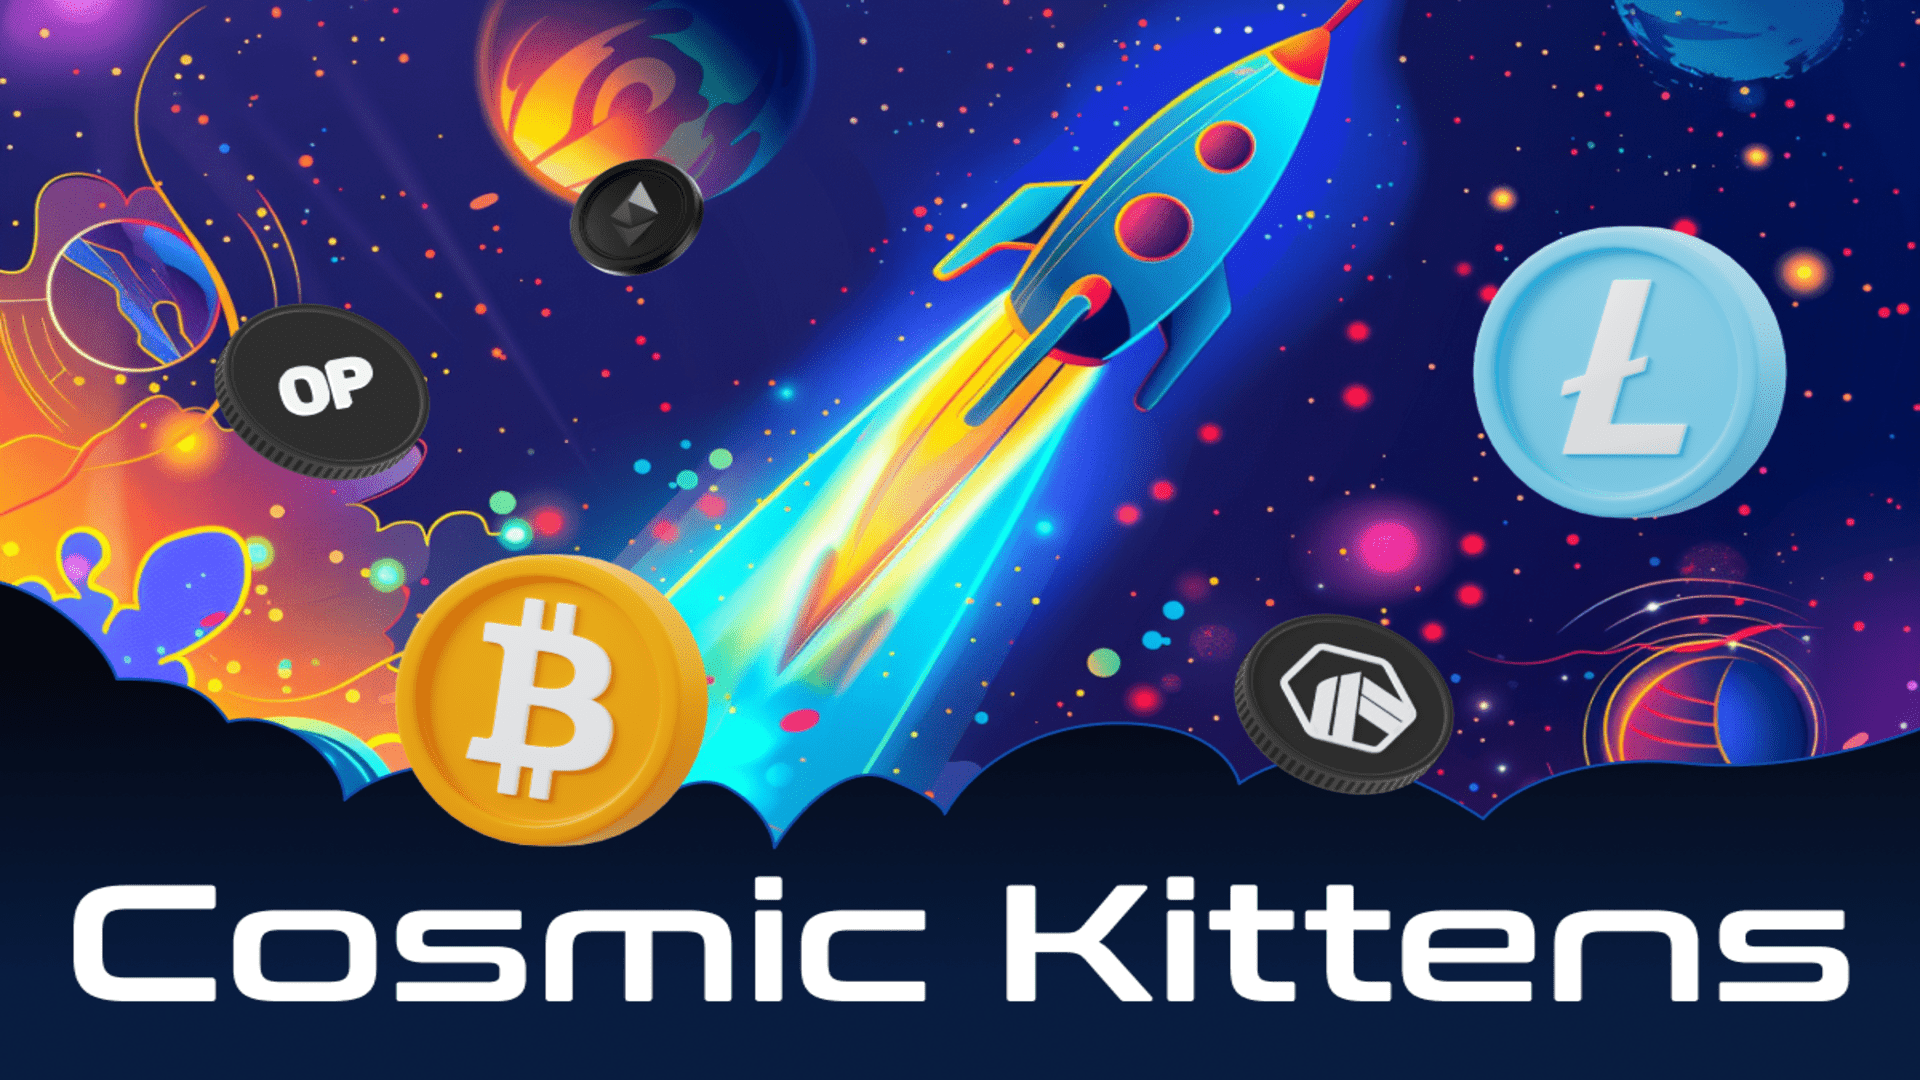 MATIC Price Falls Over 14% In 7 Days While Analysts Call Cosmic Kittens Pump